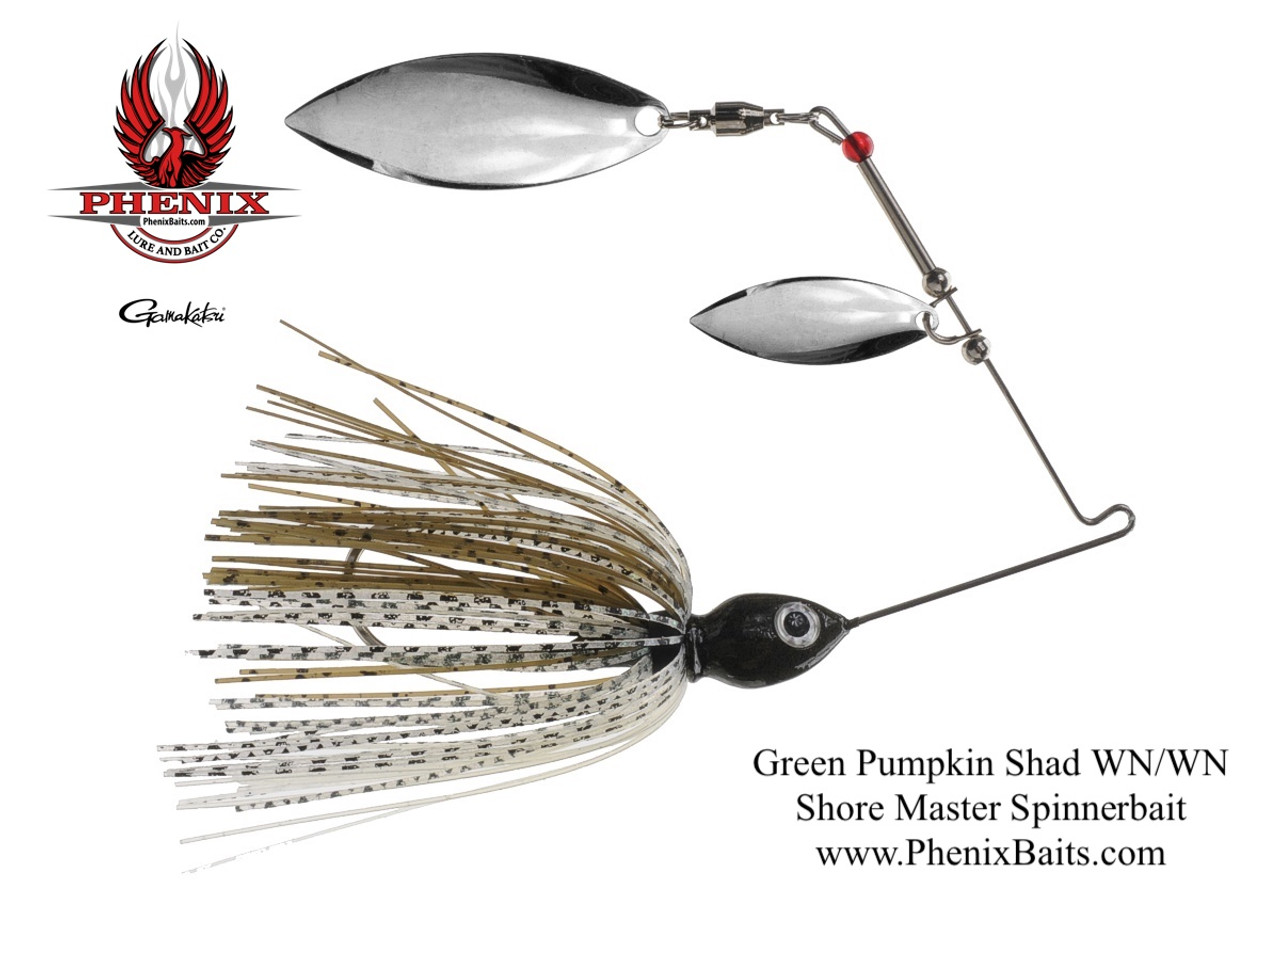 Phenix Shore Master Spinnerbait - Green Pumpkin Shad with Double